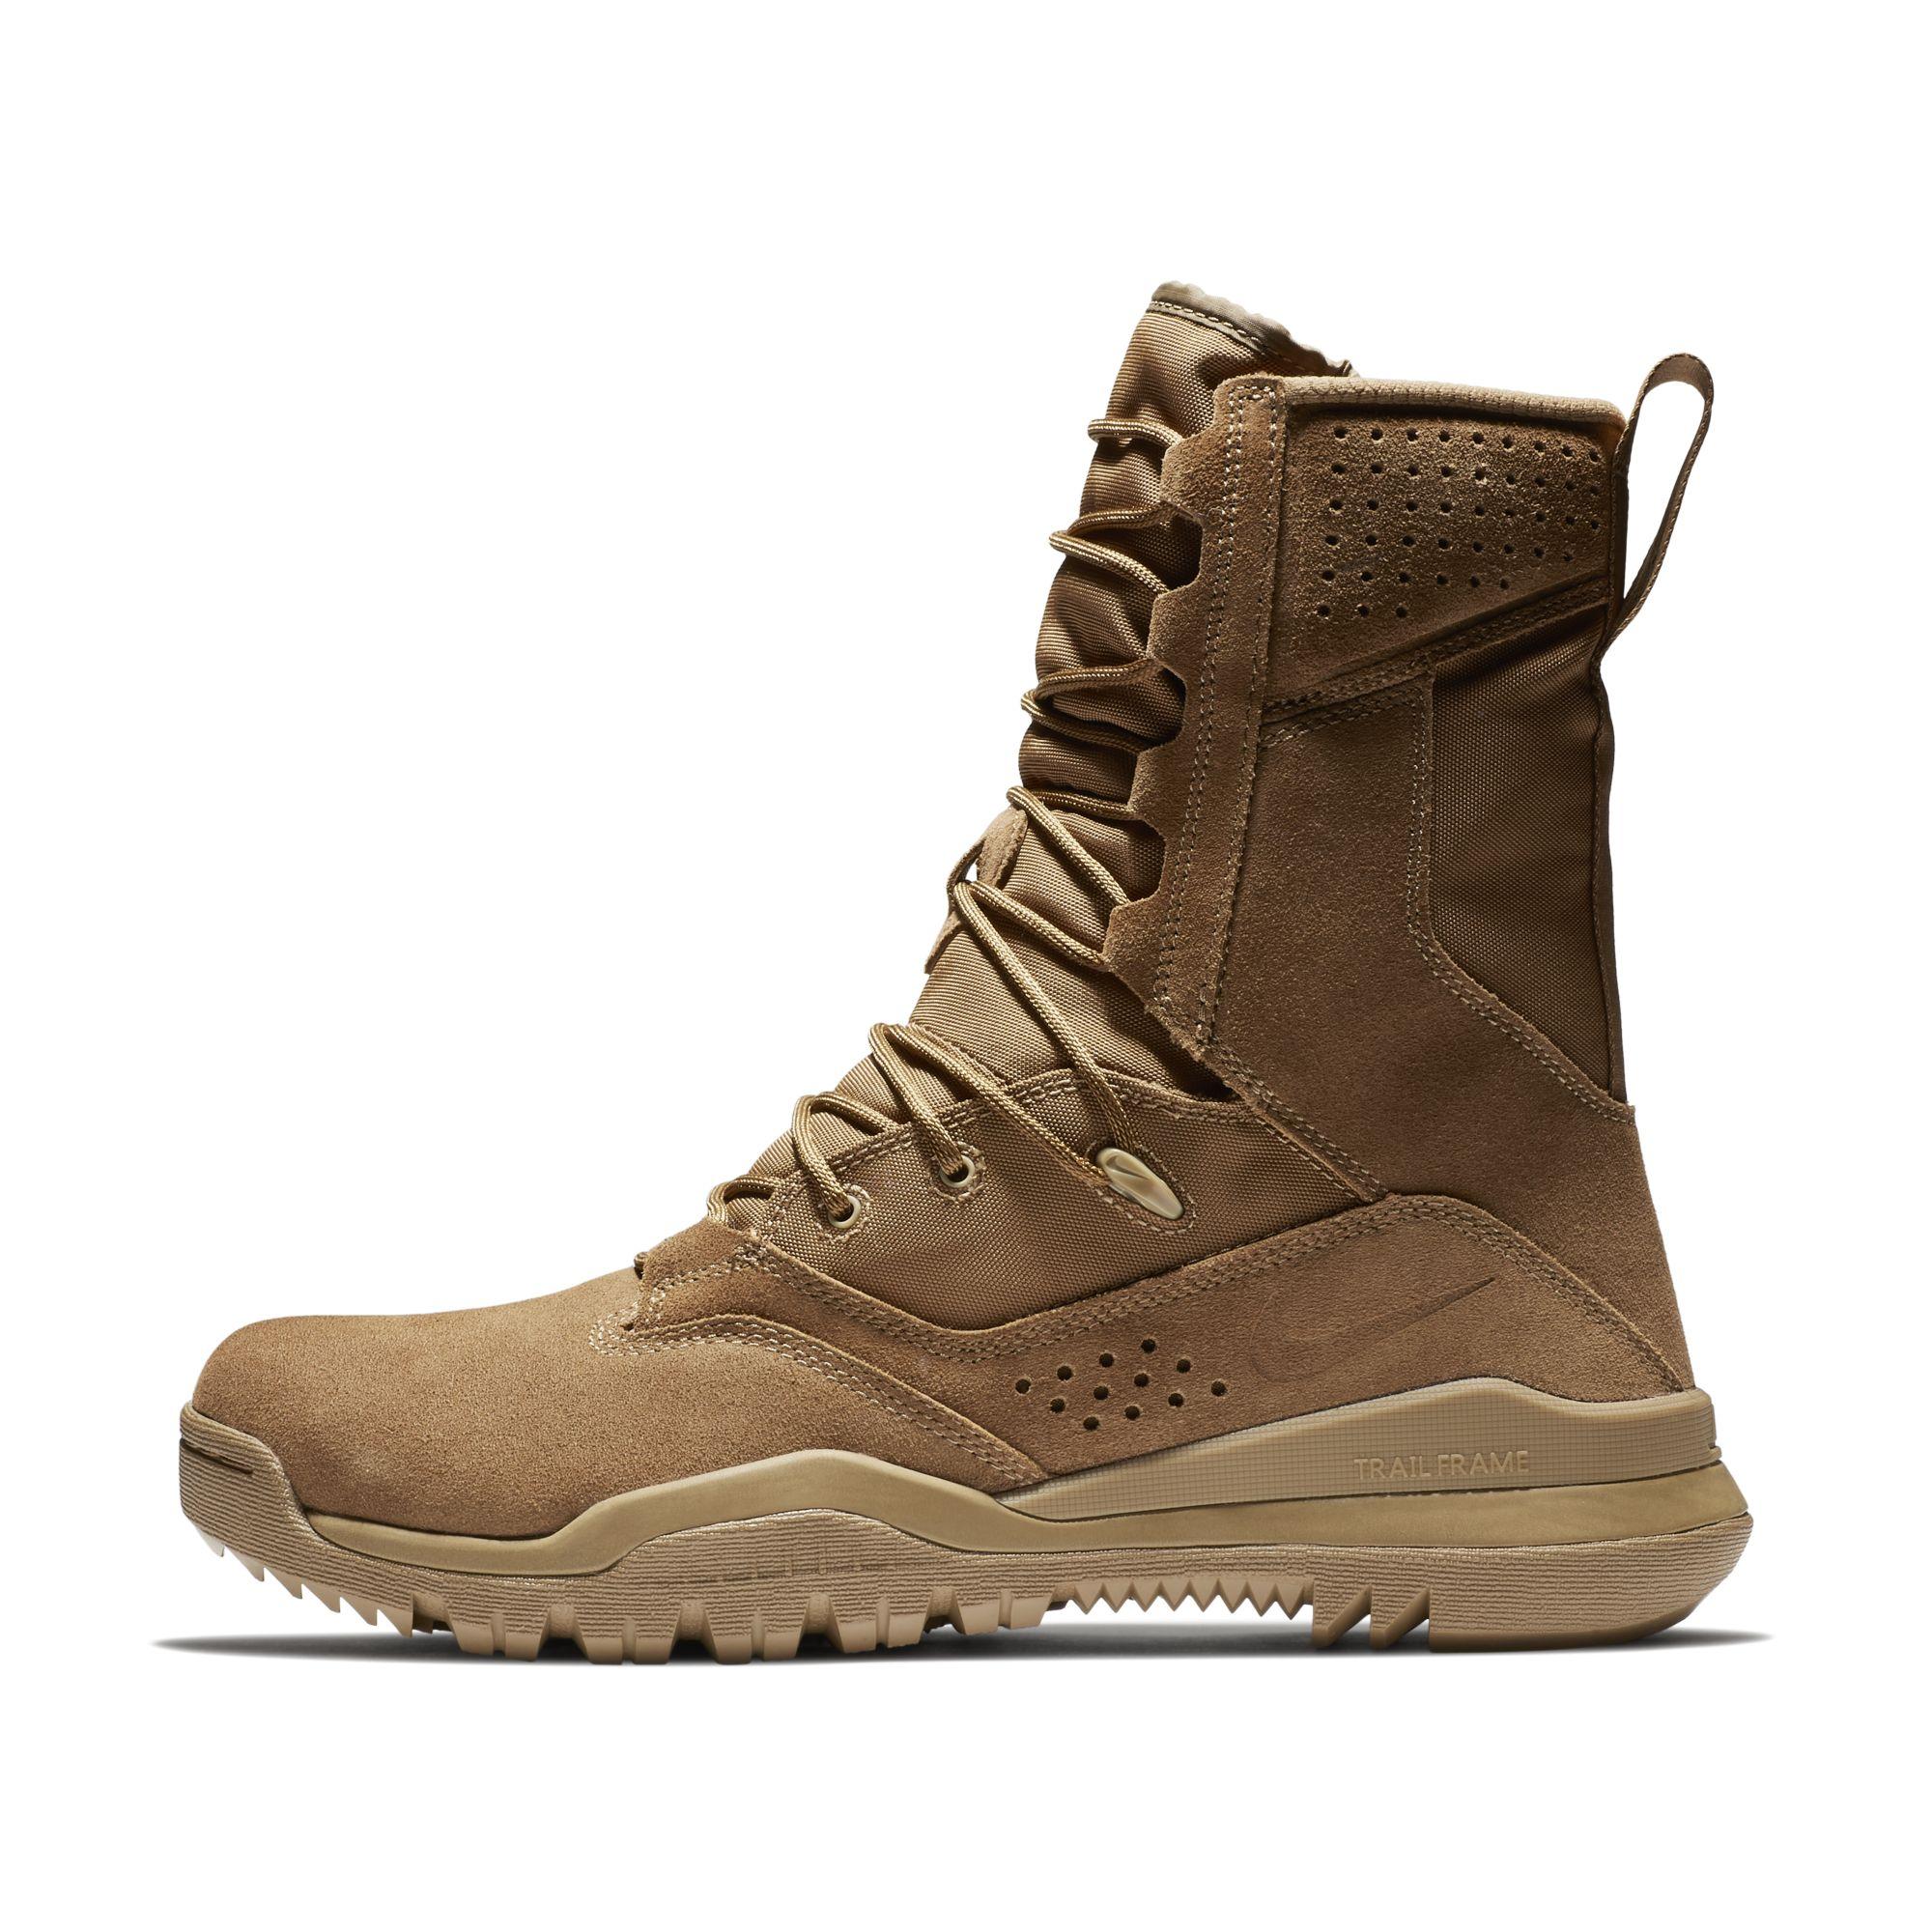 Nike Sfb 2 Leather Tactical Boots in Brown for Men Lyst